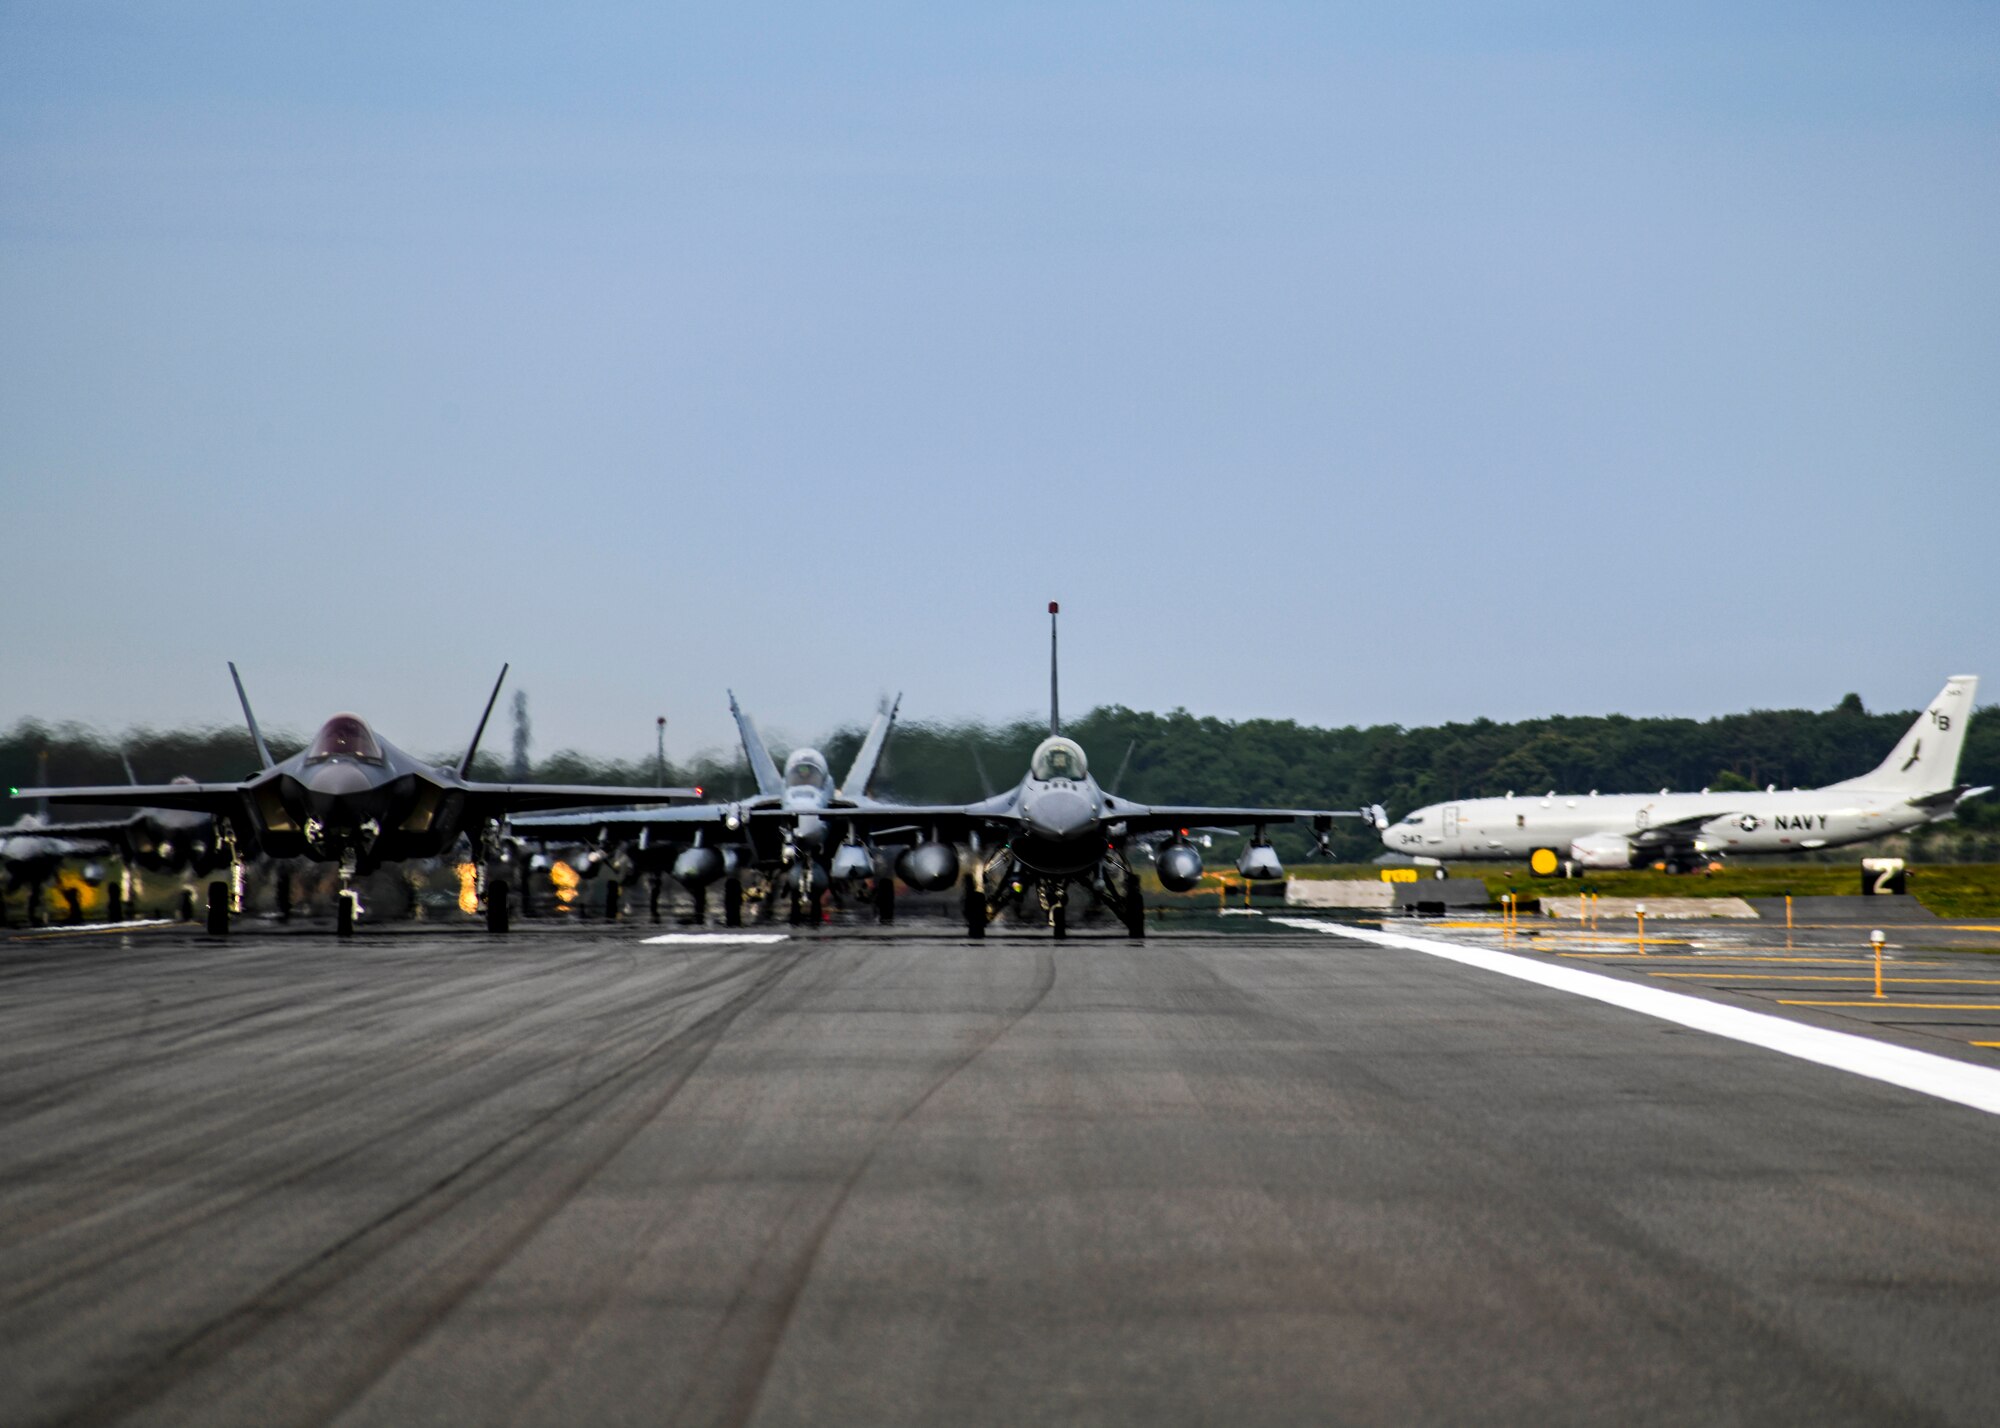 Twelve U.S. Air Force F-16CM Fighting Falcons, 12 Koku-Jieitai F-35A Lightning II Joint Strike Fighters, two U.S. Navy EA-18G Growlers, a USN C-12 Huron, two USAF MC-130J Commando II aircraft, and a USN P-8 Poseidon participate in an "Elephant Walk" at Misawa Air Base, June 22, 2020. The Elephant Walk showcased Misawa Air Base's collective readiness and ability to generate combat airpower at a moment's notice to ensure regional stability throughout the Indo-Pacific. This is Misawa Air Base's first time hosting a bilateral and joint Elephant Walk.